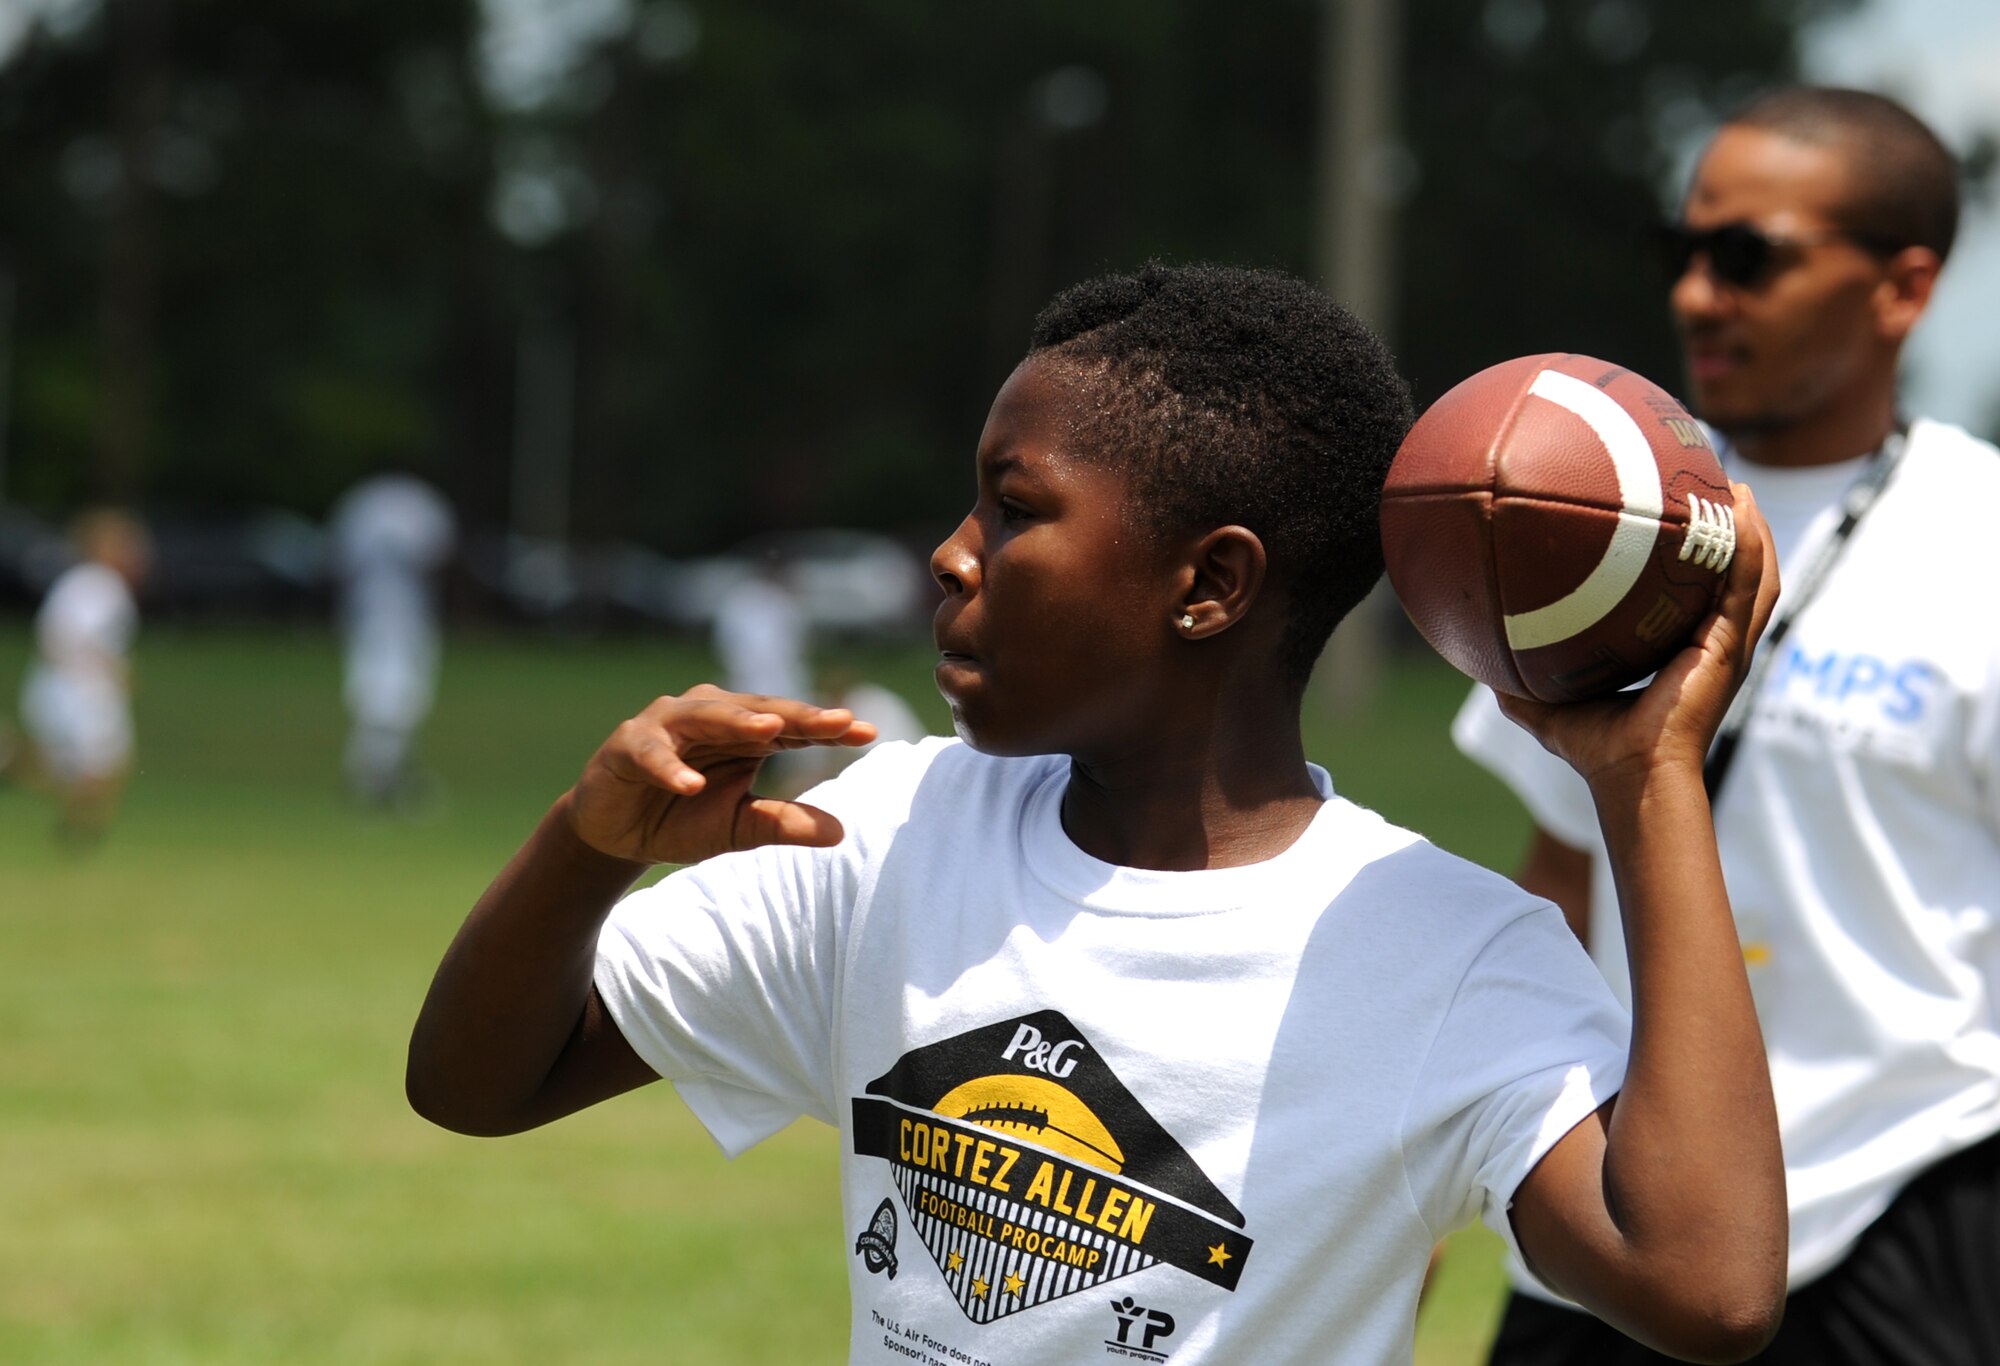 A “future quarterback” cocks his arm back during a National Football League ProCamp, July 16, 2015, at Seymour Johnson Air Force Base, North Carolina. Cortez Allen, Pittsburgh Steelers defensive back, was the camp’s guest athlete. (U.S. Air Force photo/Senior Airman Ashley J. Thum)